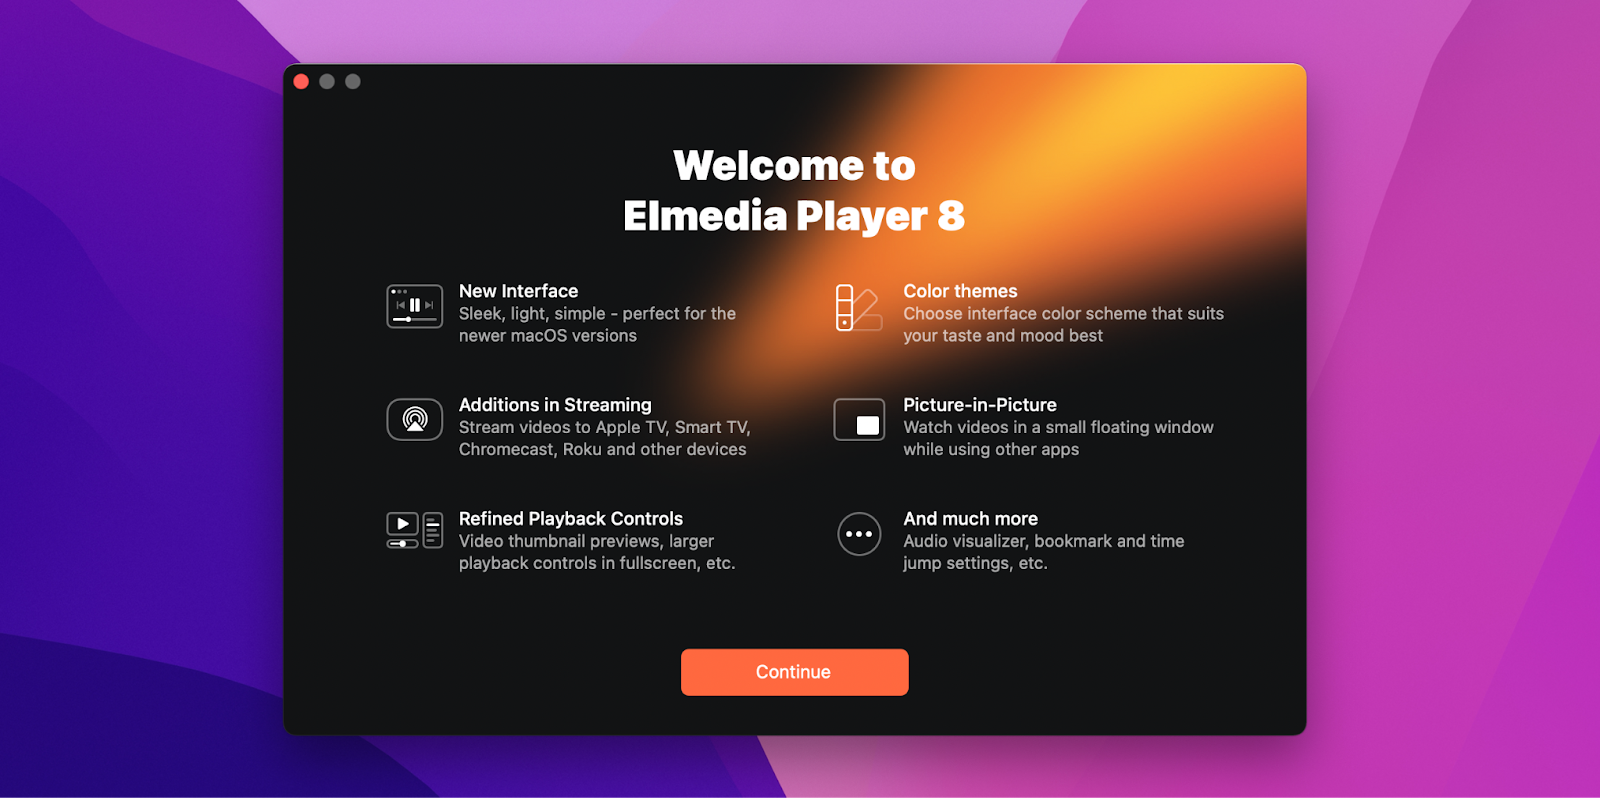 Welcome to Elmedia Player